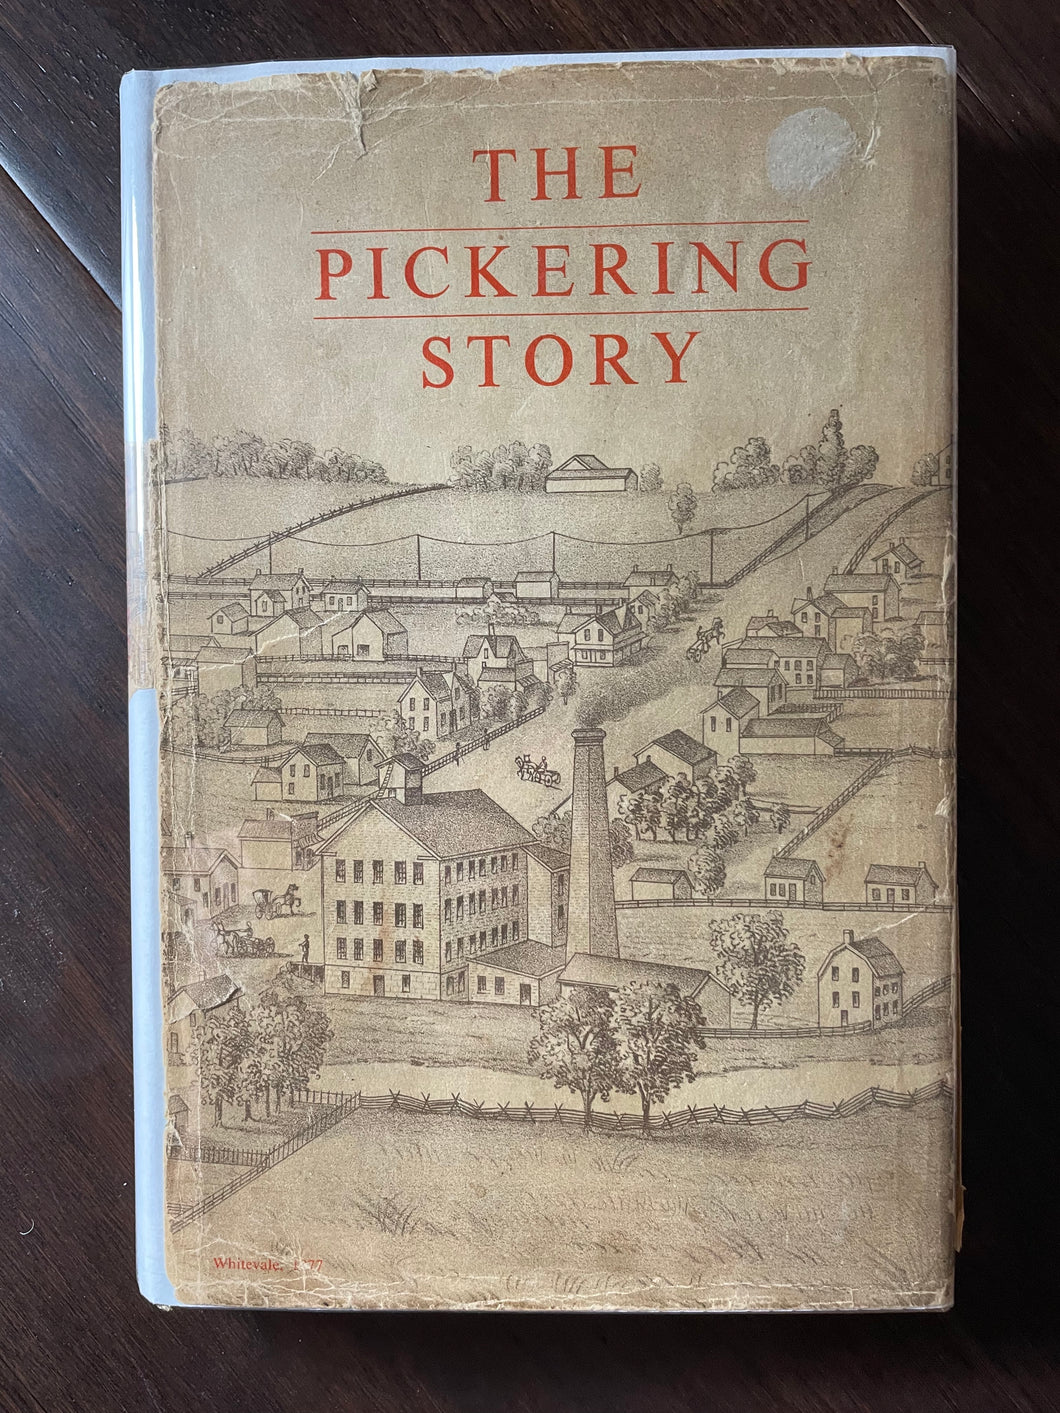 The Pickering Story